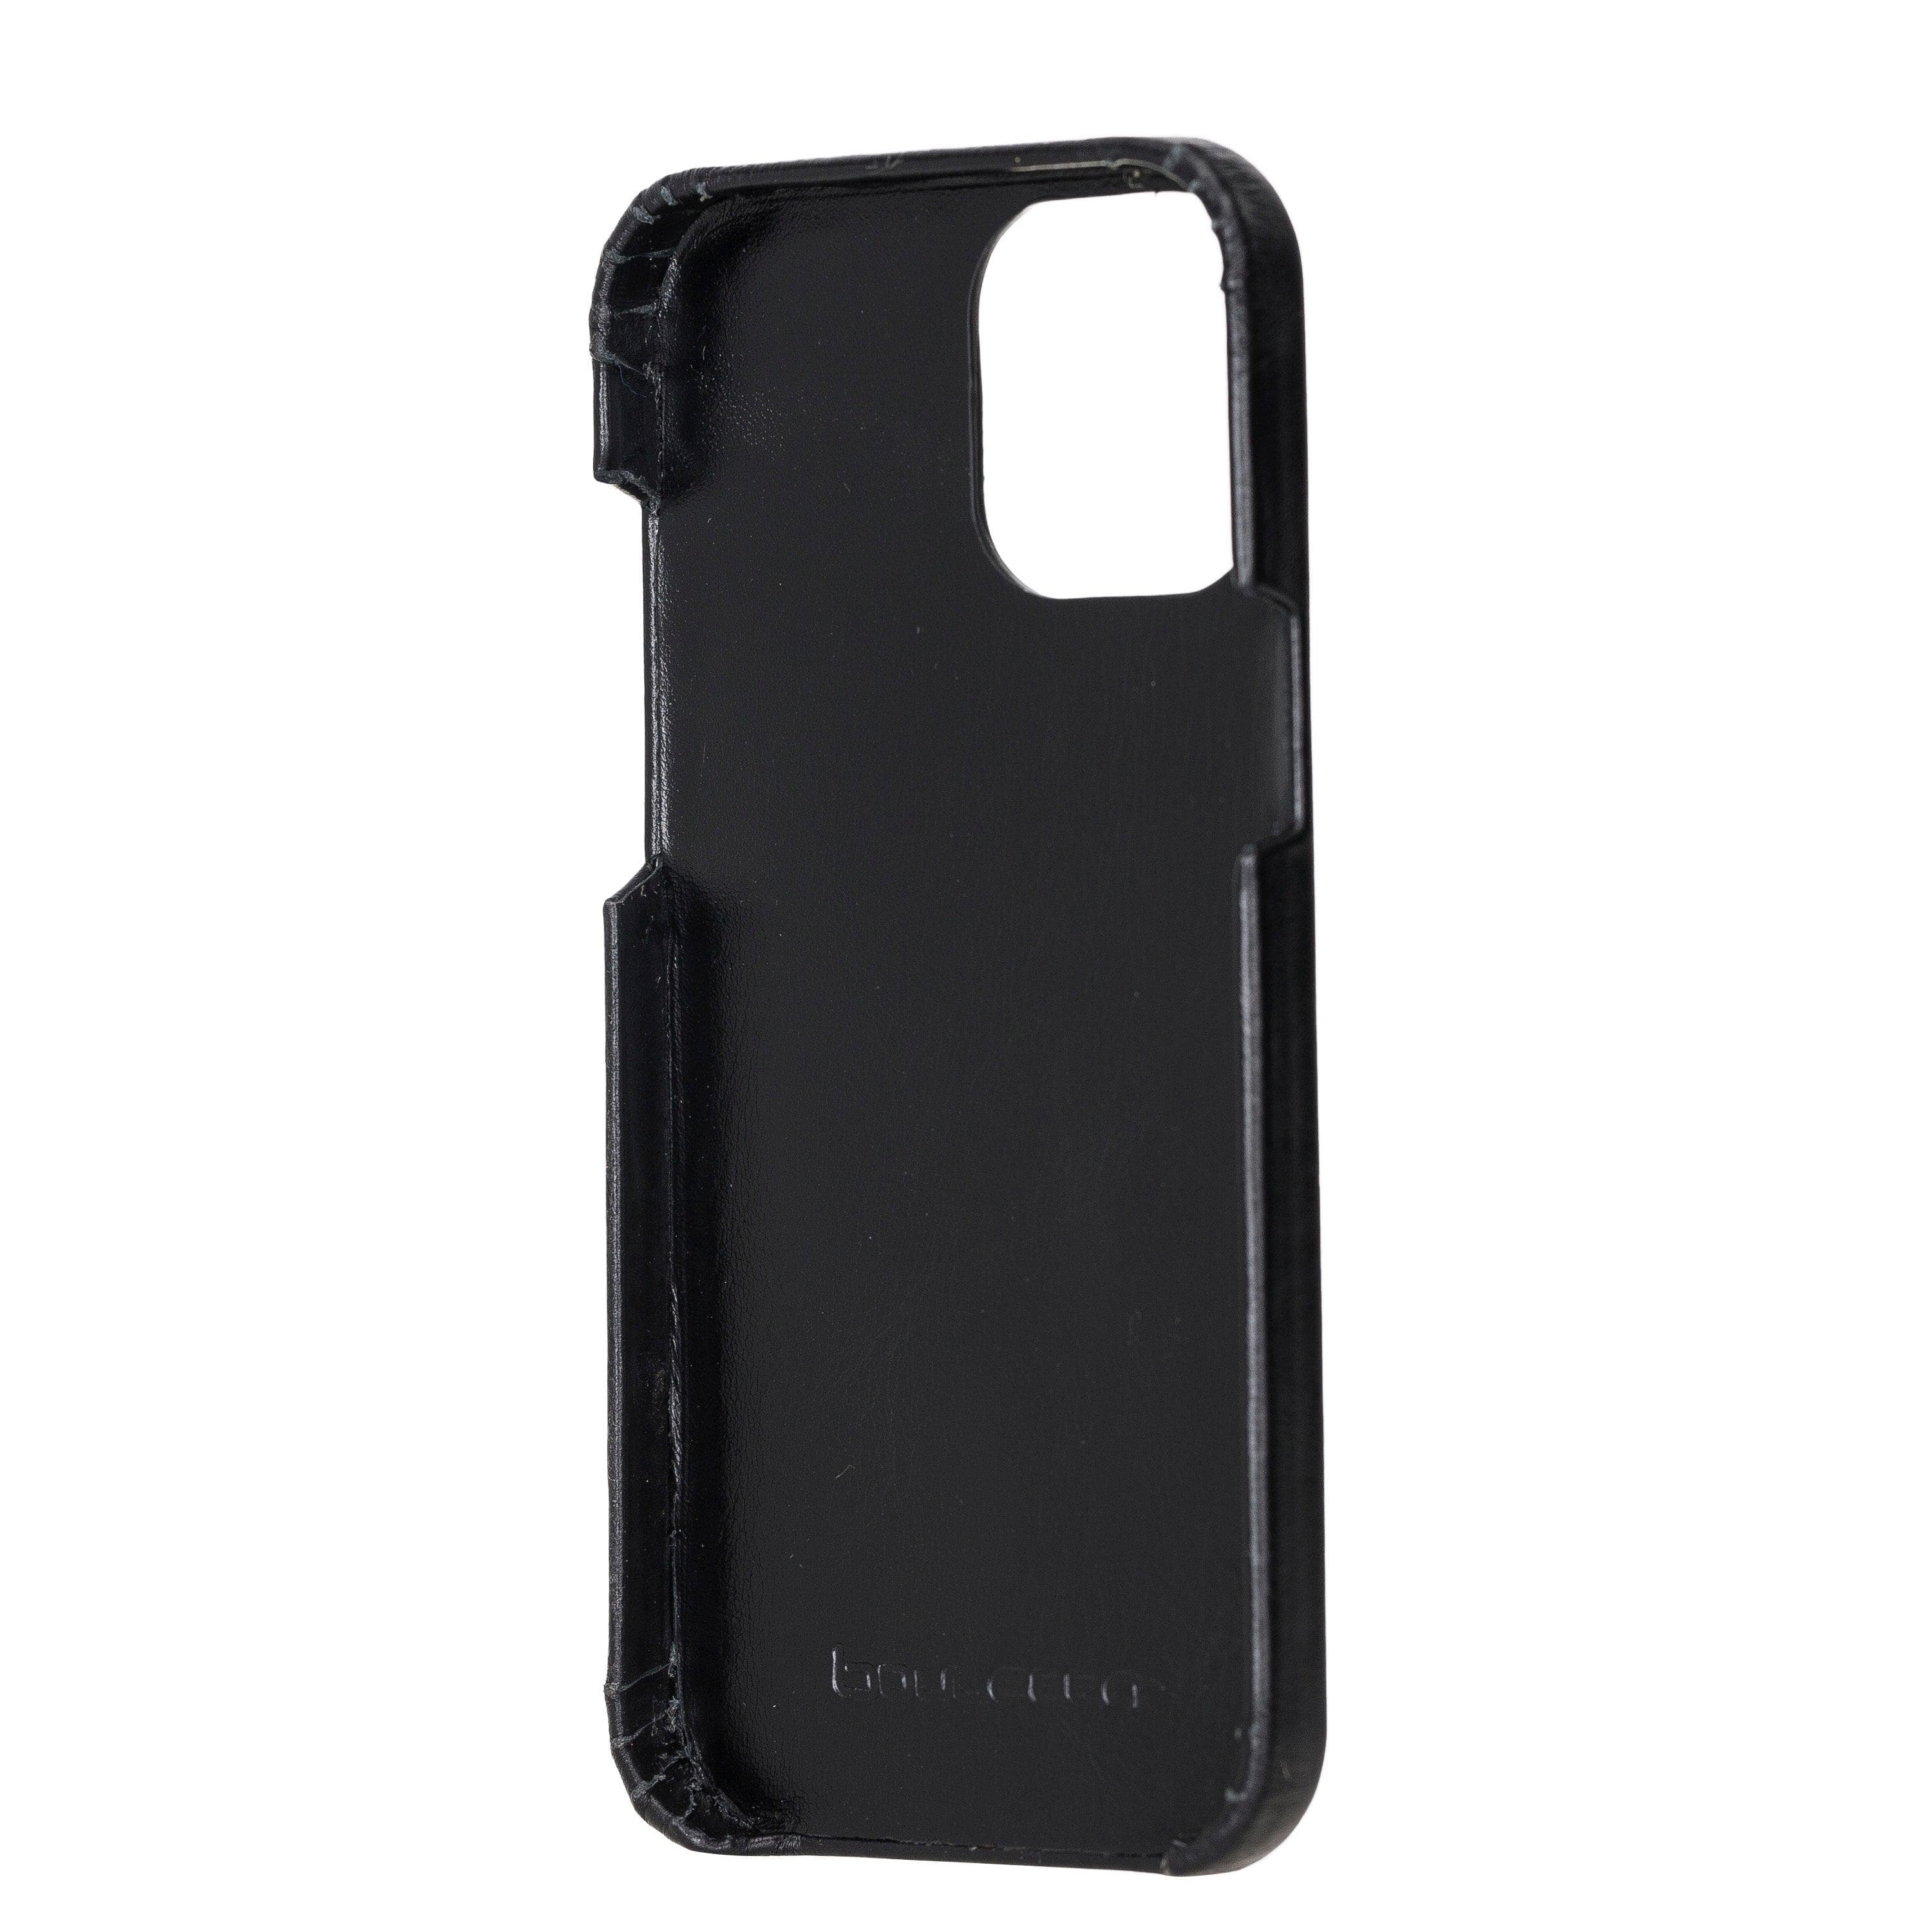 Fully Leather Back Cover for Apple iPhone 12 Series Bouletta LTD